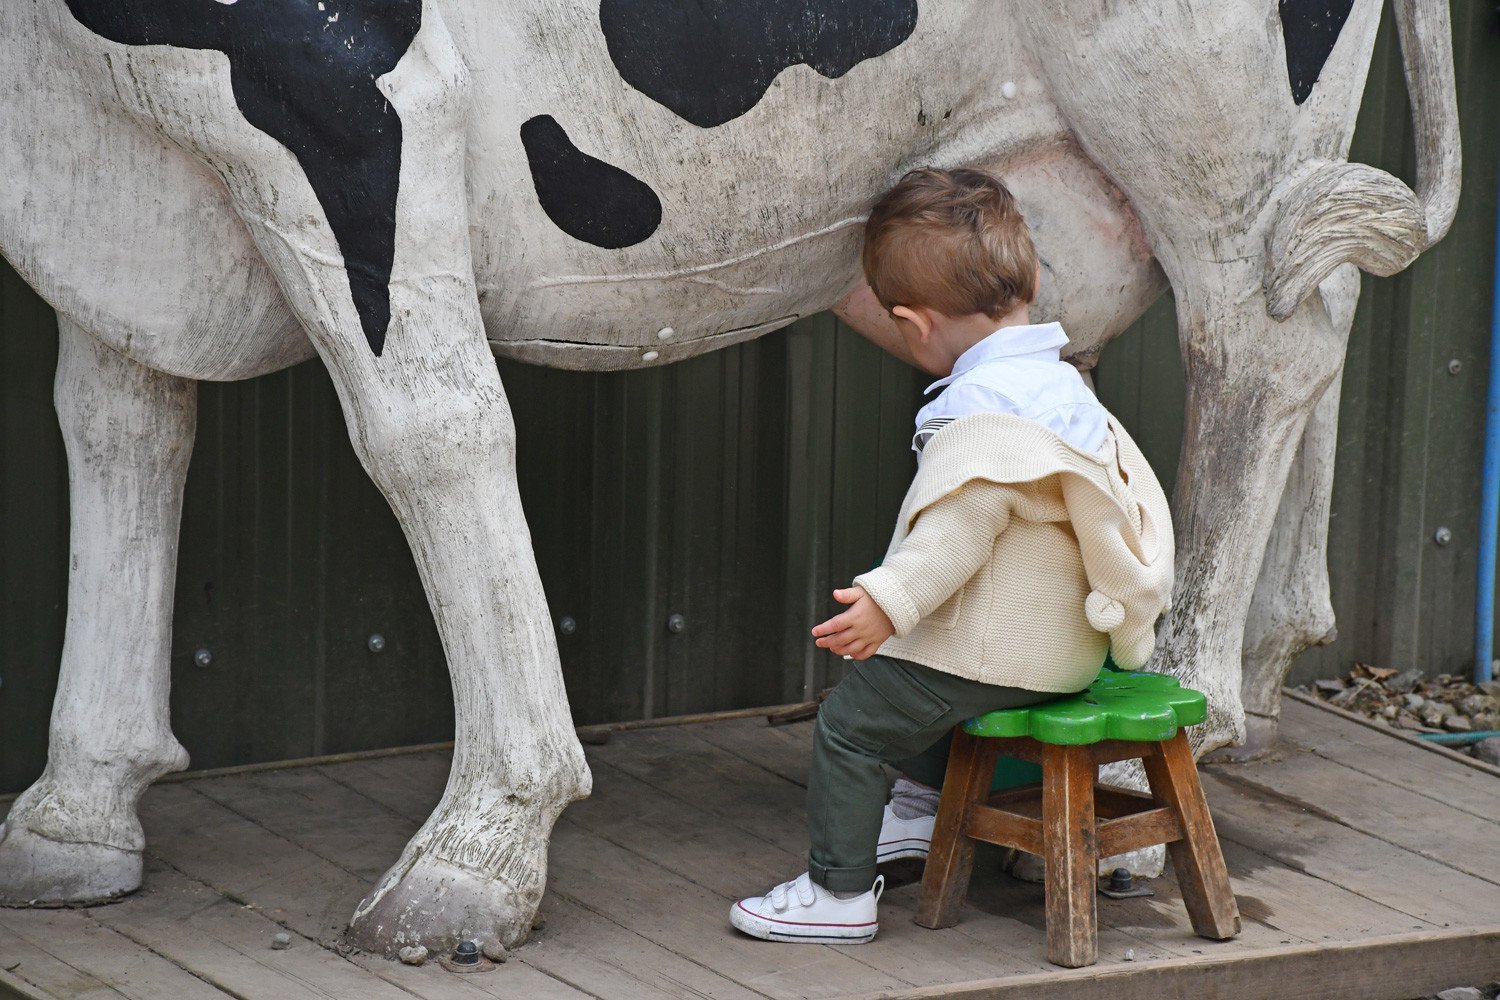 Max learning to milk a cow at Auchingarrich Wildlife Park